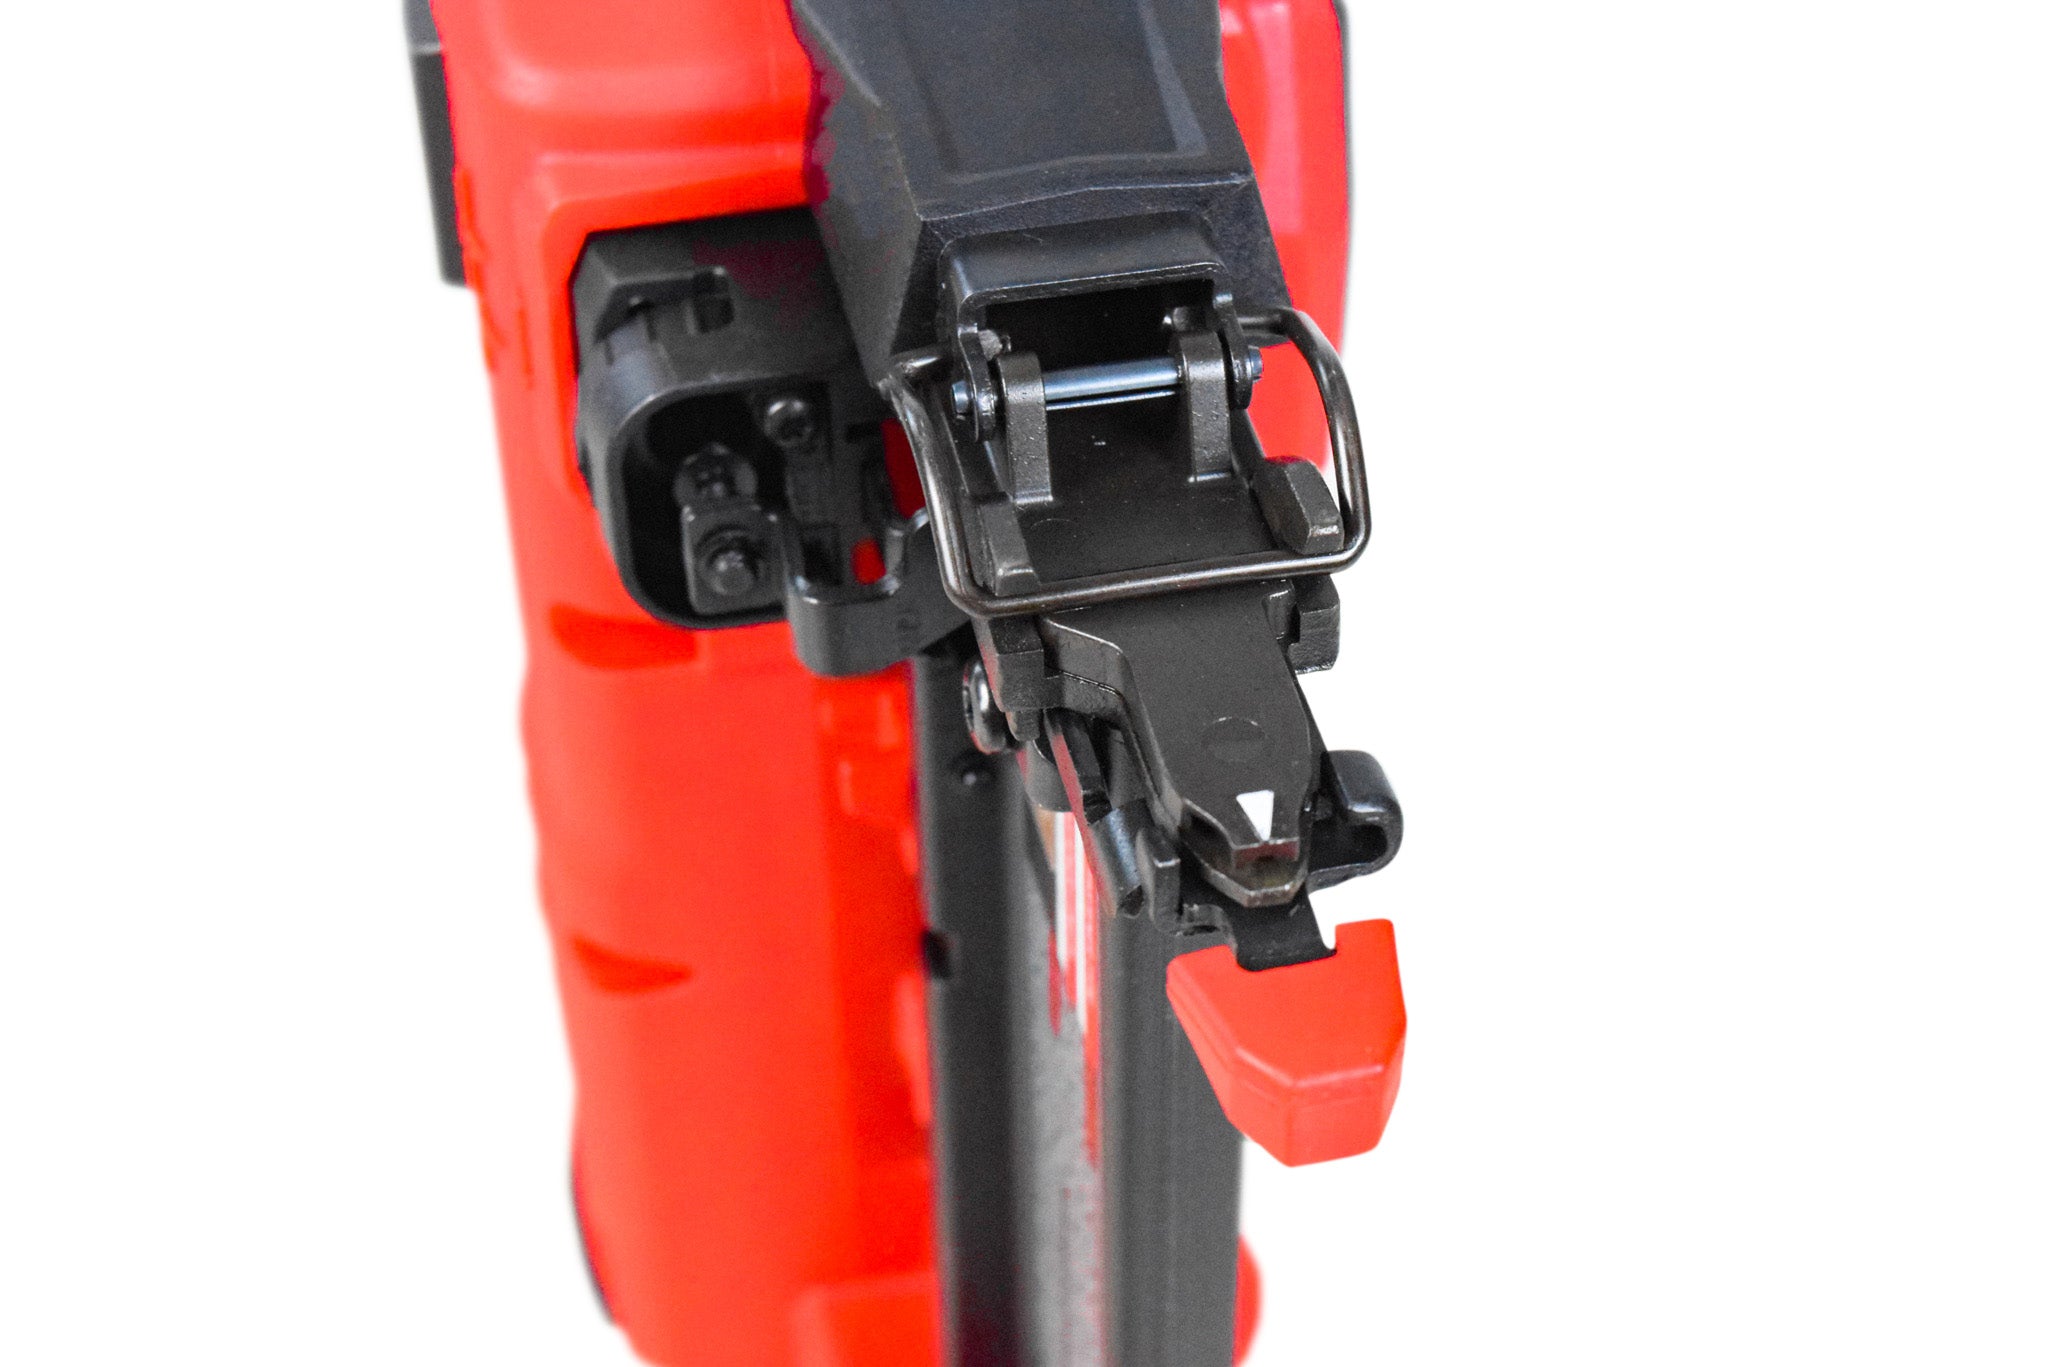 Milwaukee 2746-20 M18 Fuel 18V Lithium-Ion Brushless 18-Gauge Brad Nailer (Tool Only) (CLONE)